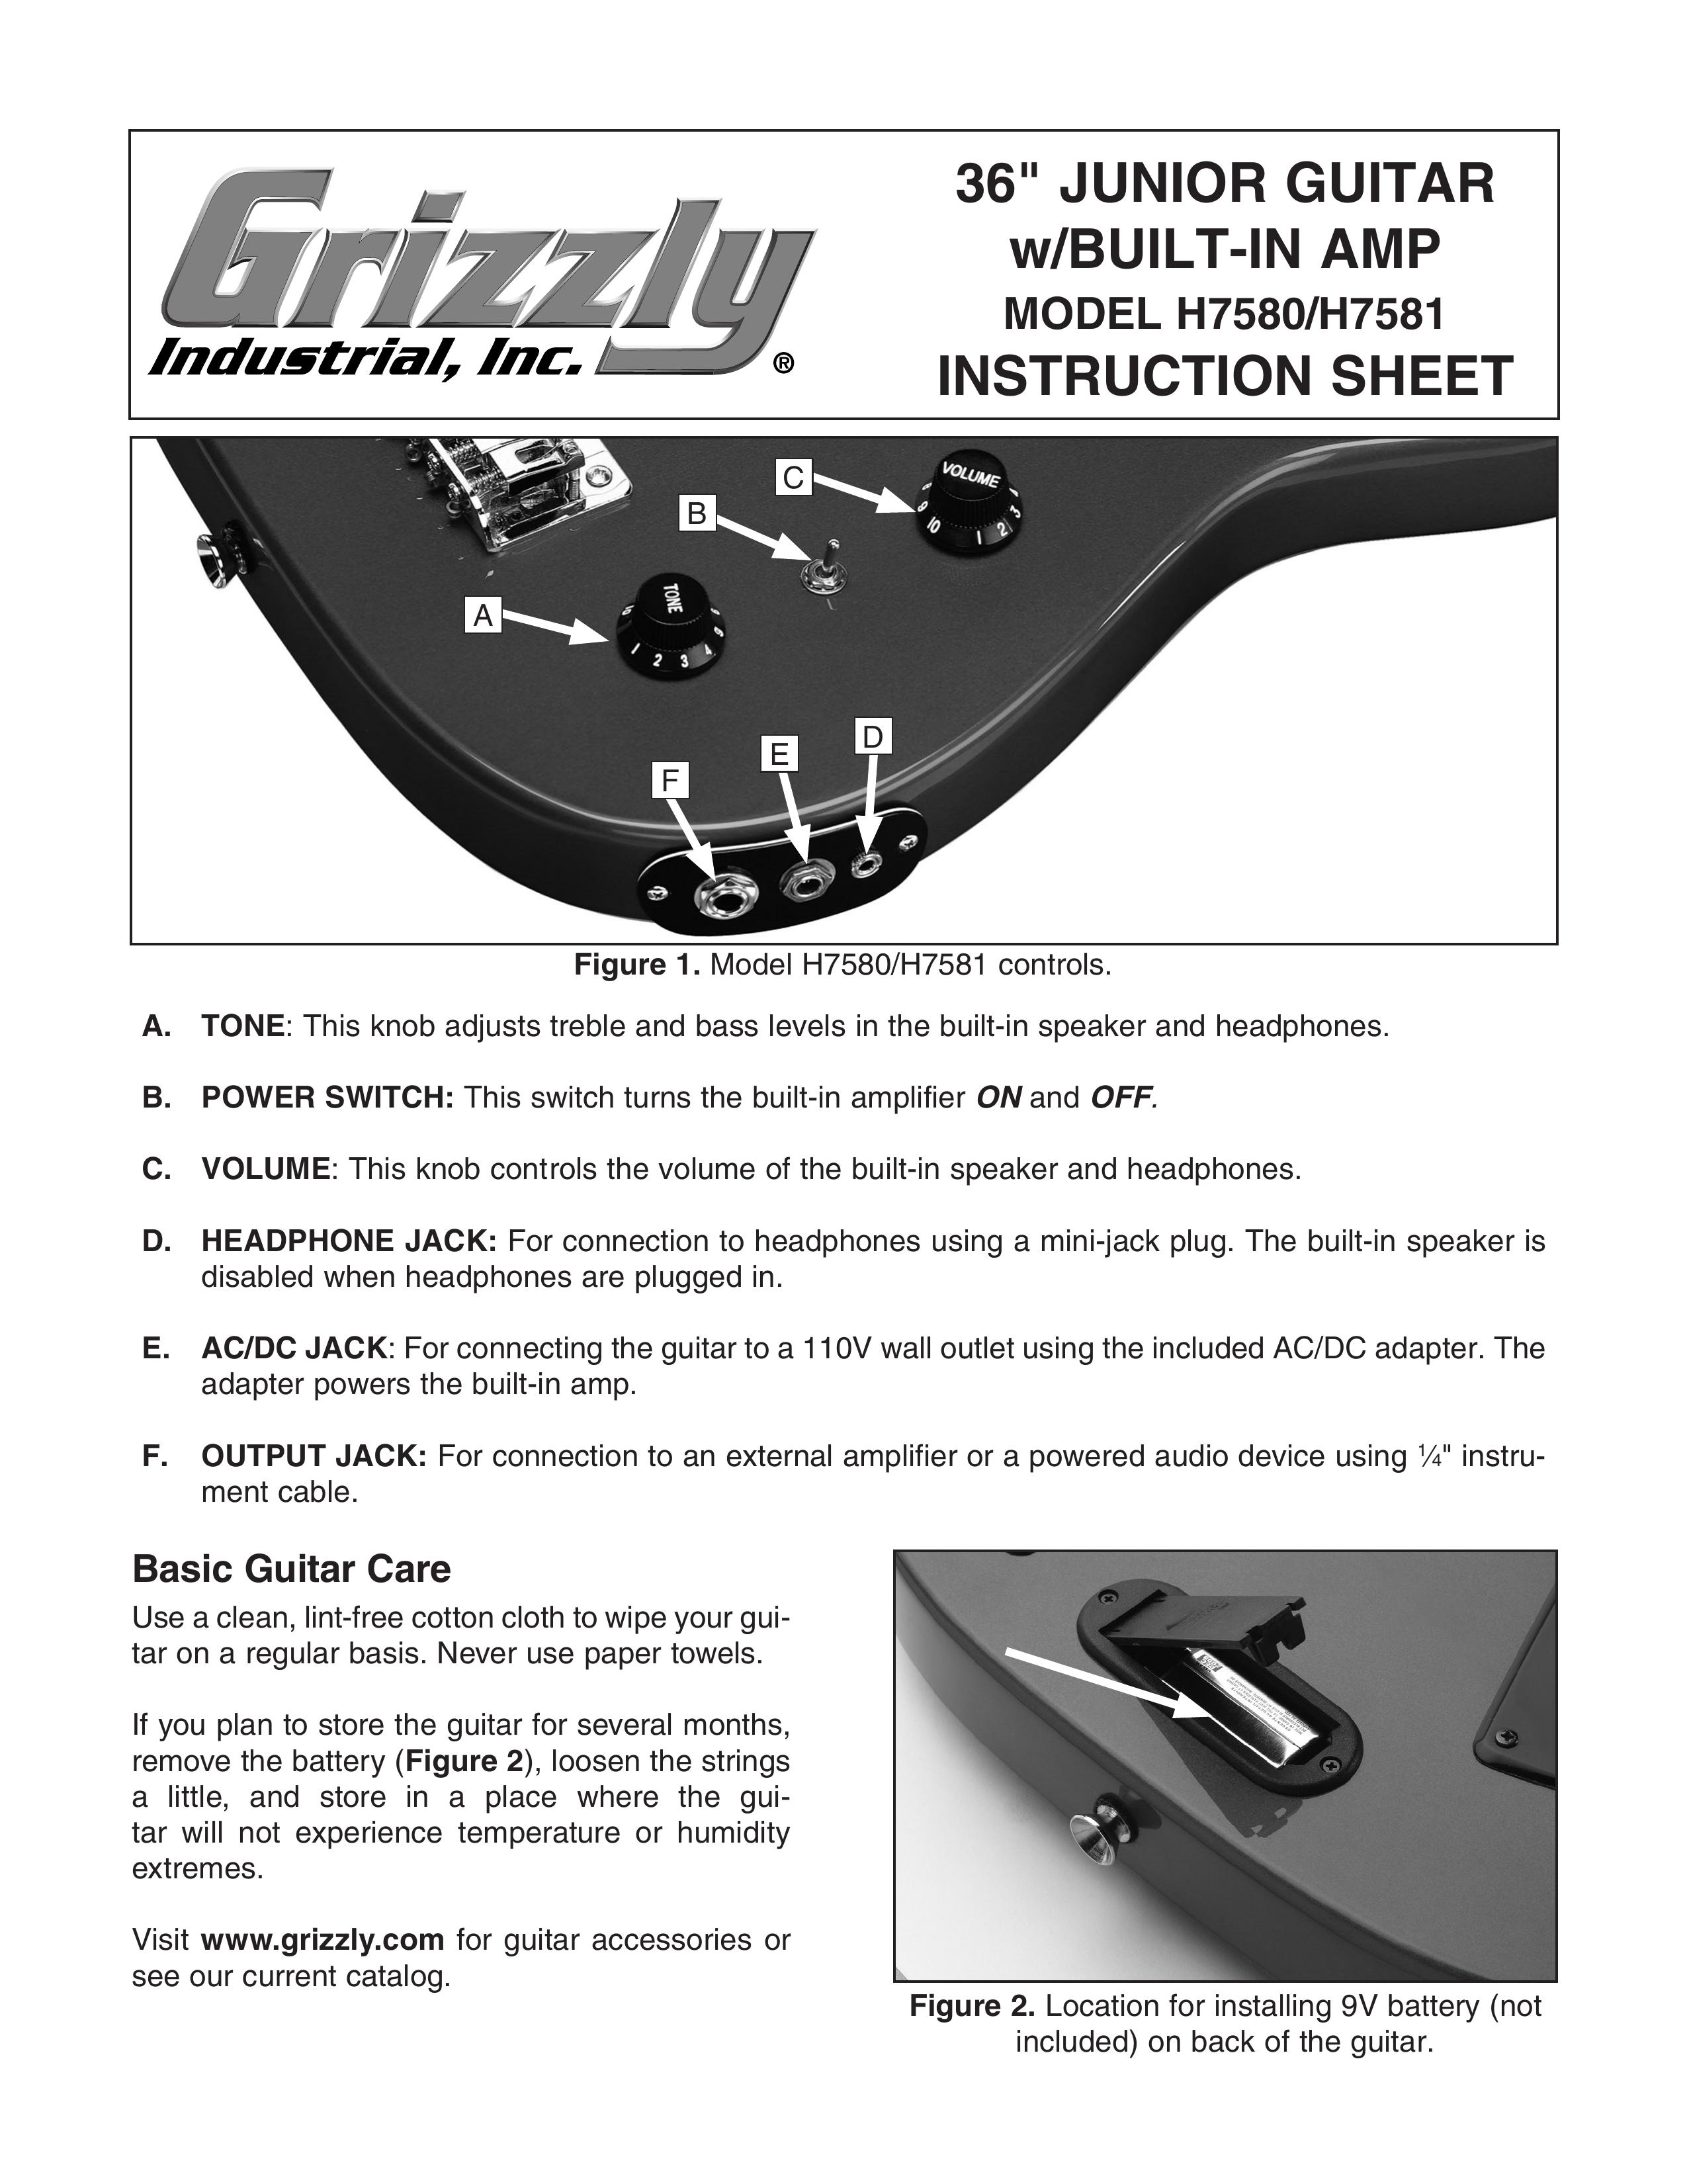 Grizzly H7580 Guitar User Manual